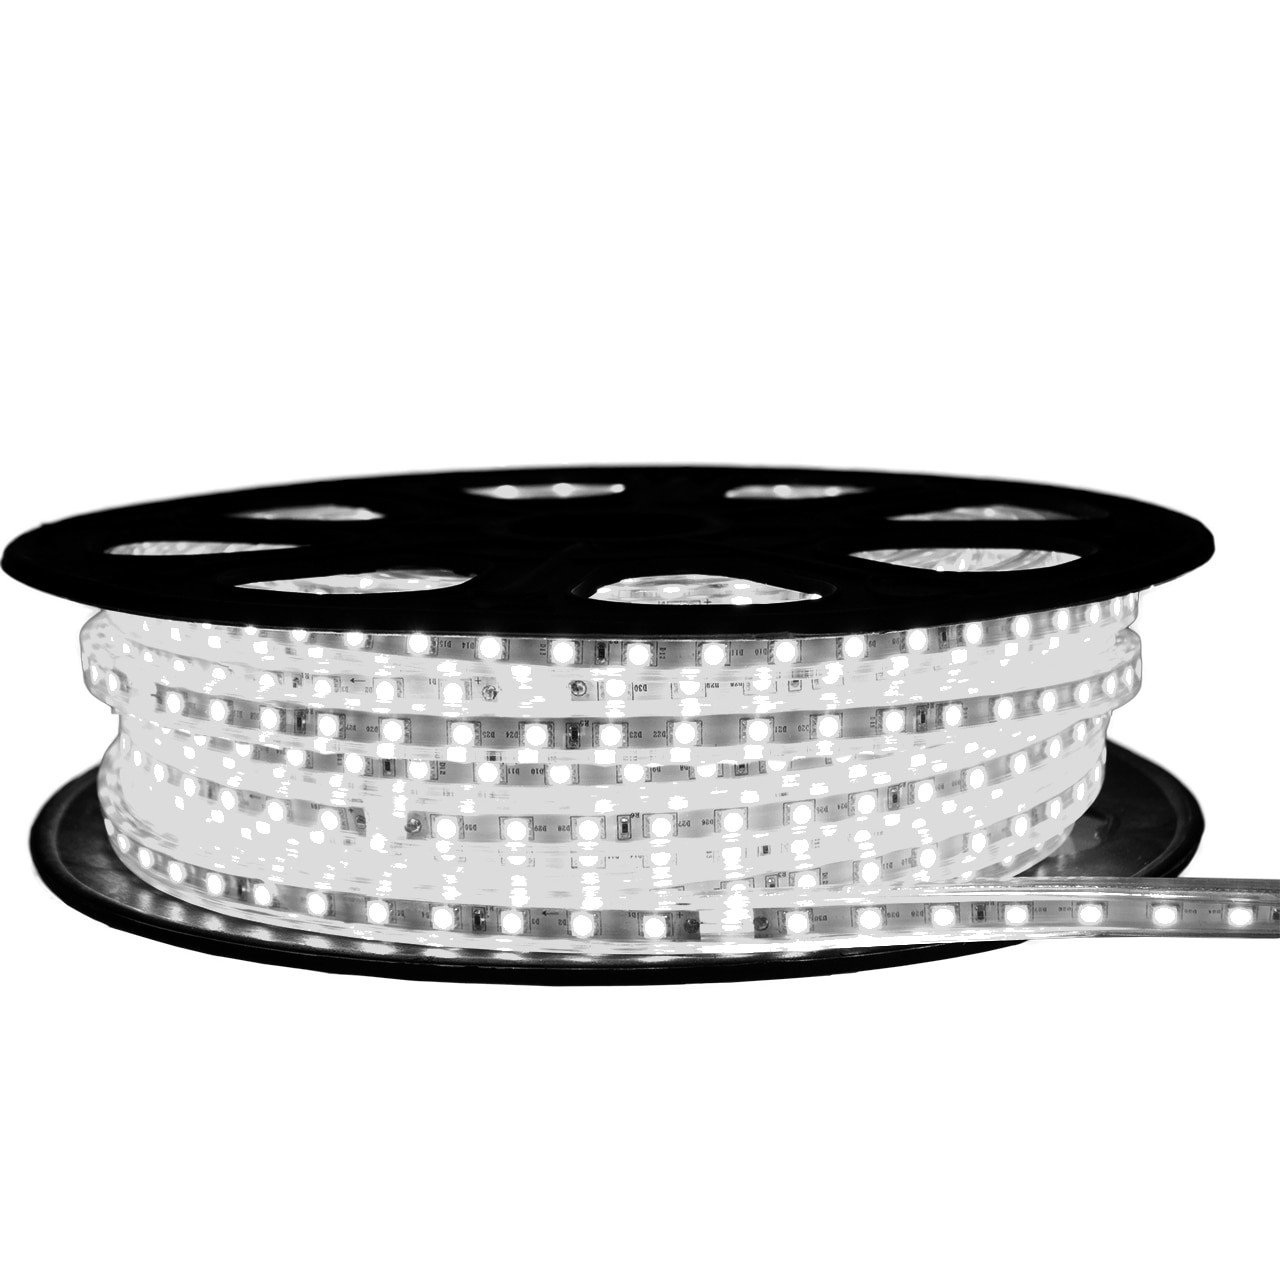 5050 SMD LED - RGB Surface Mount LED with 120 Degree Viewing Angle - 5050  SMD LED